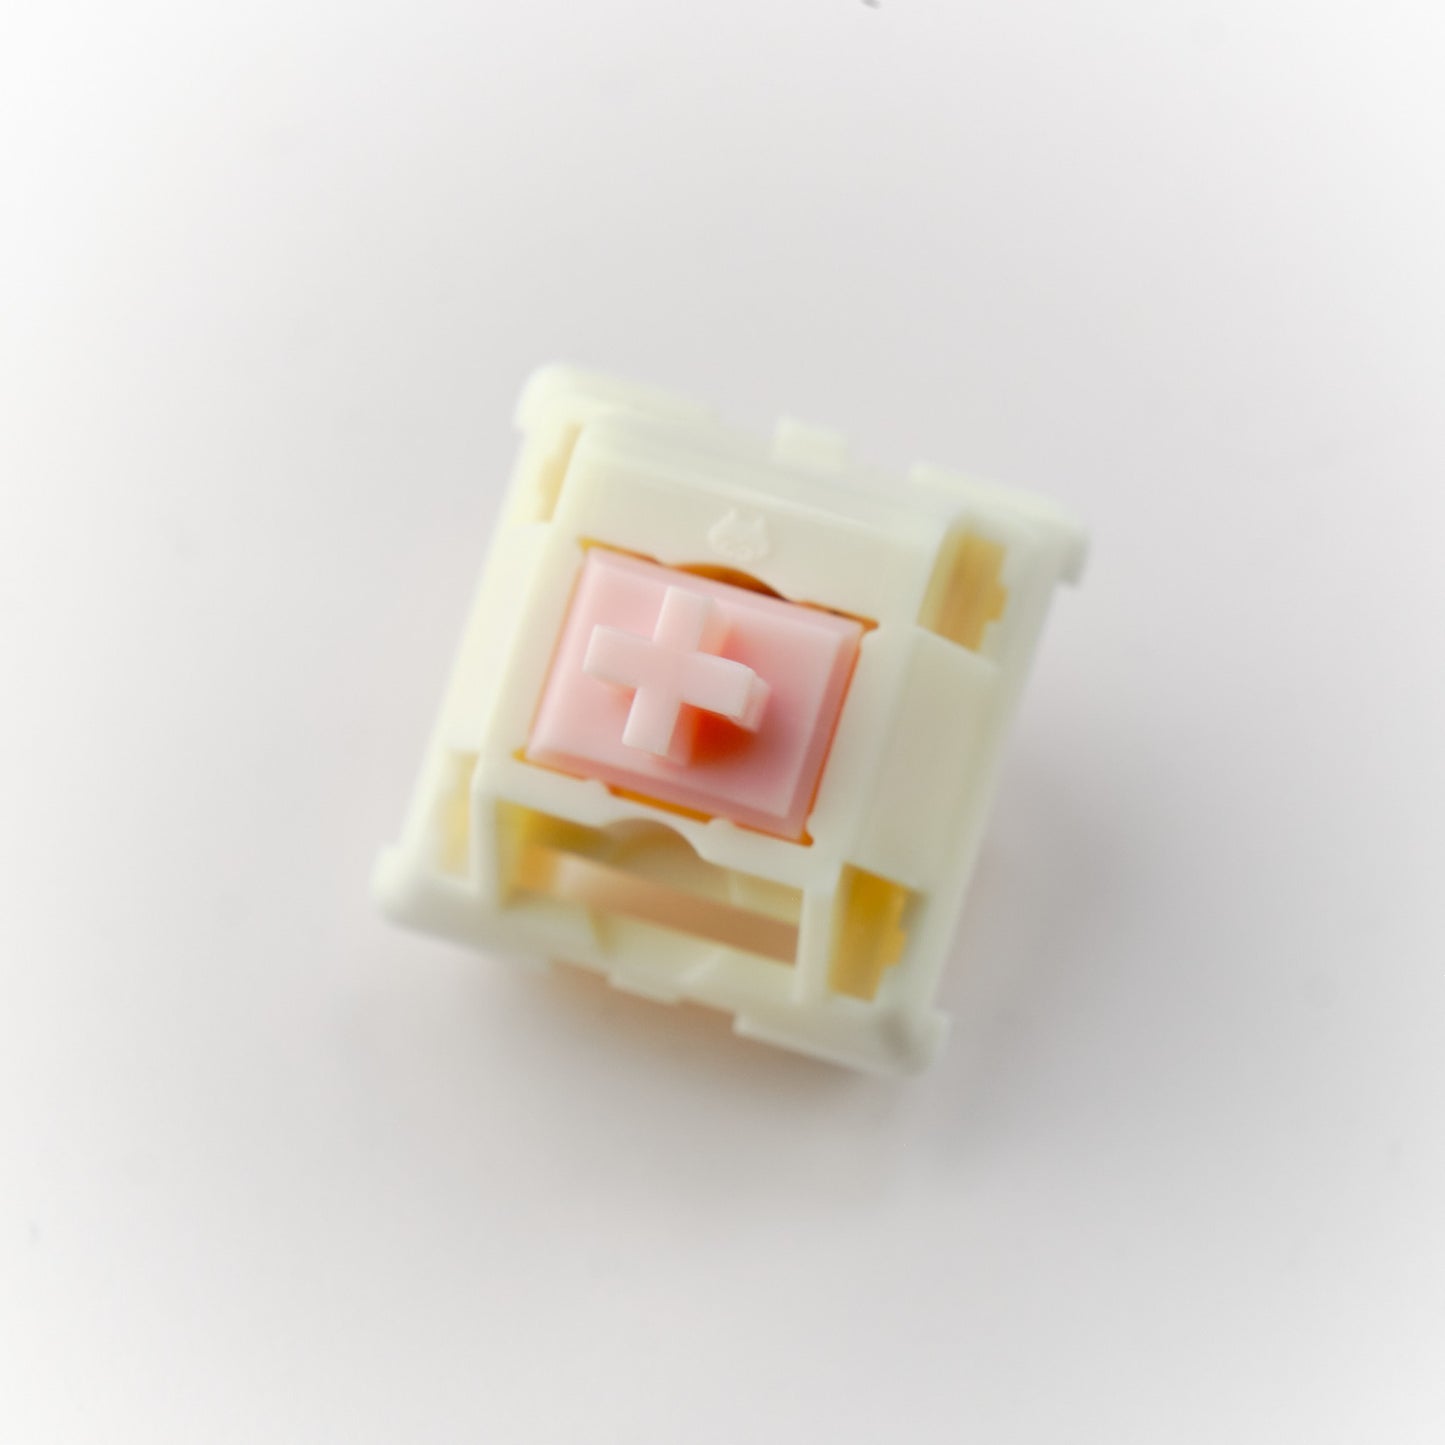 Tbcats Eclair Switches